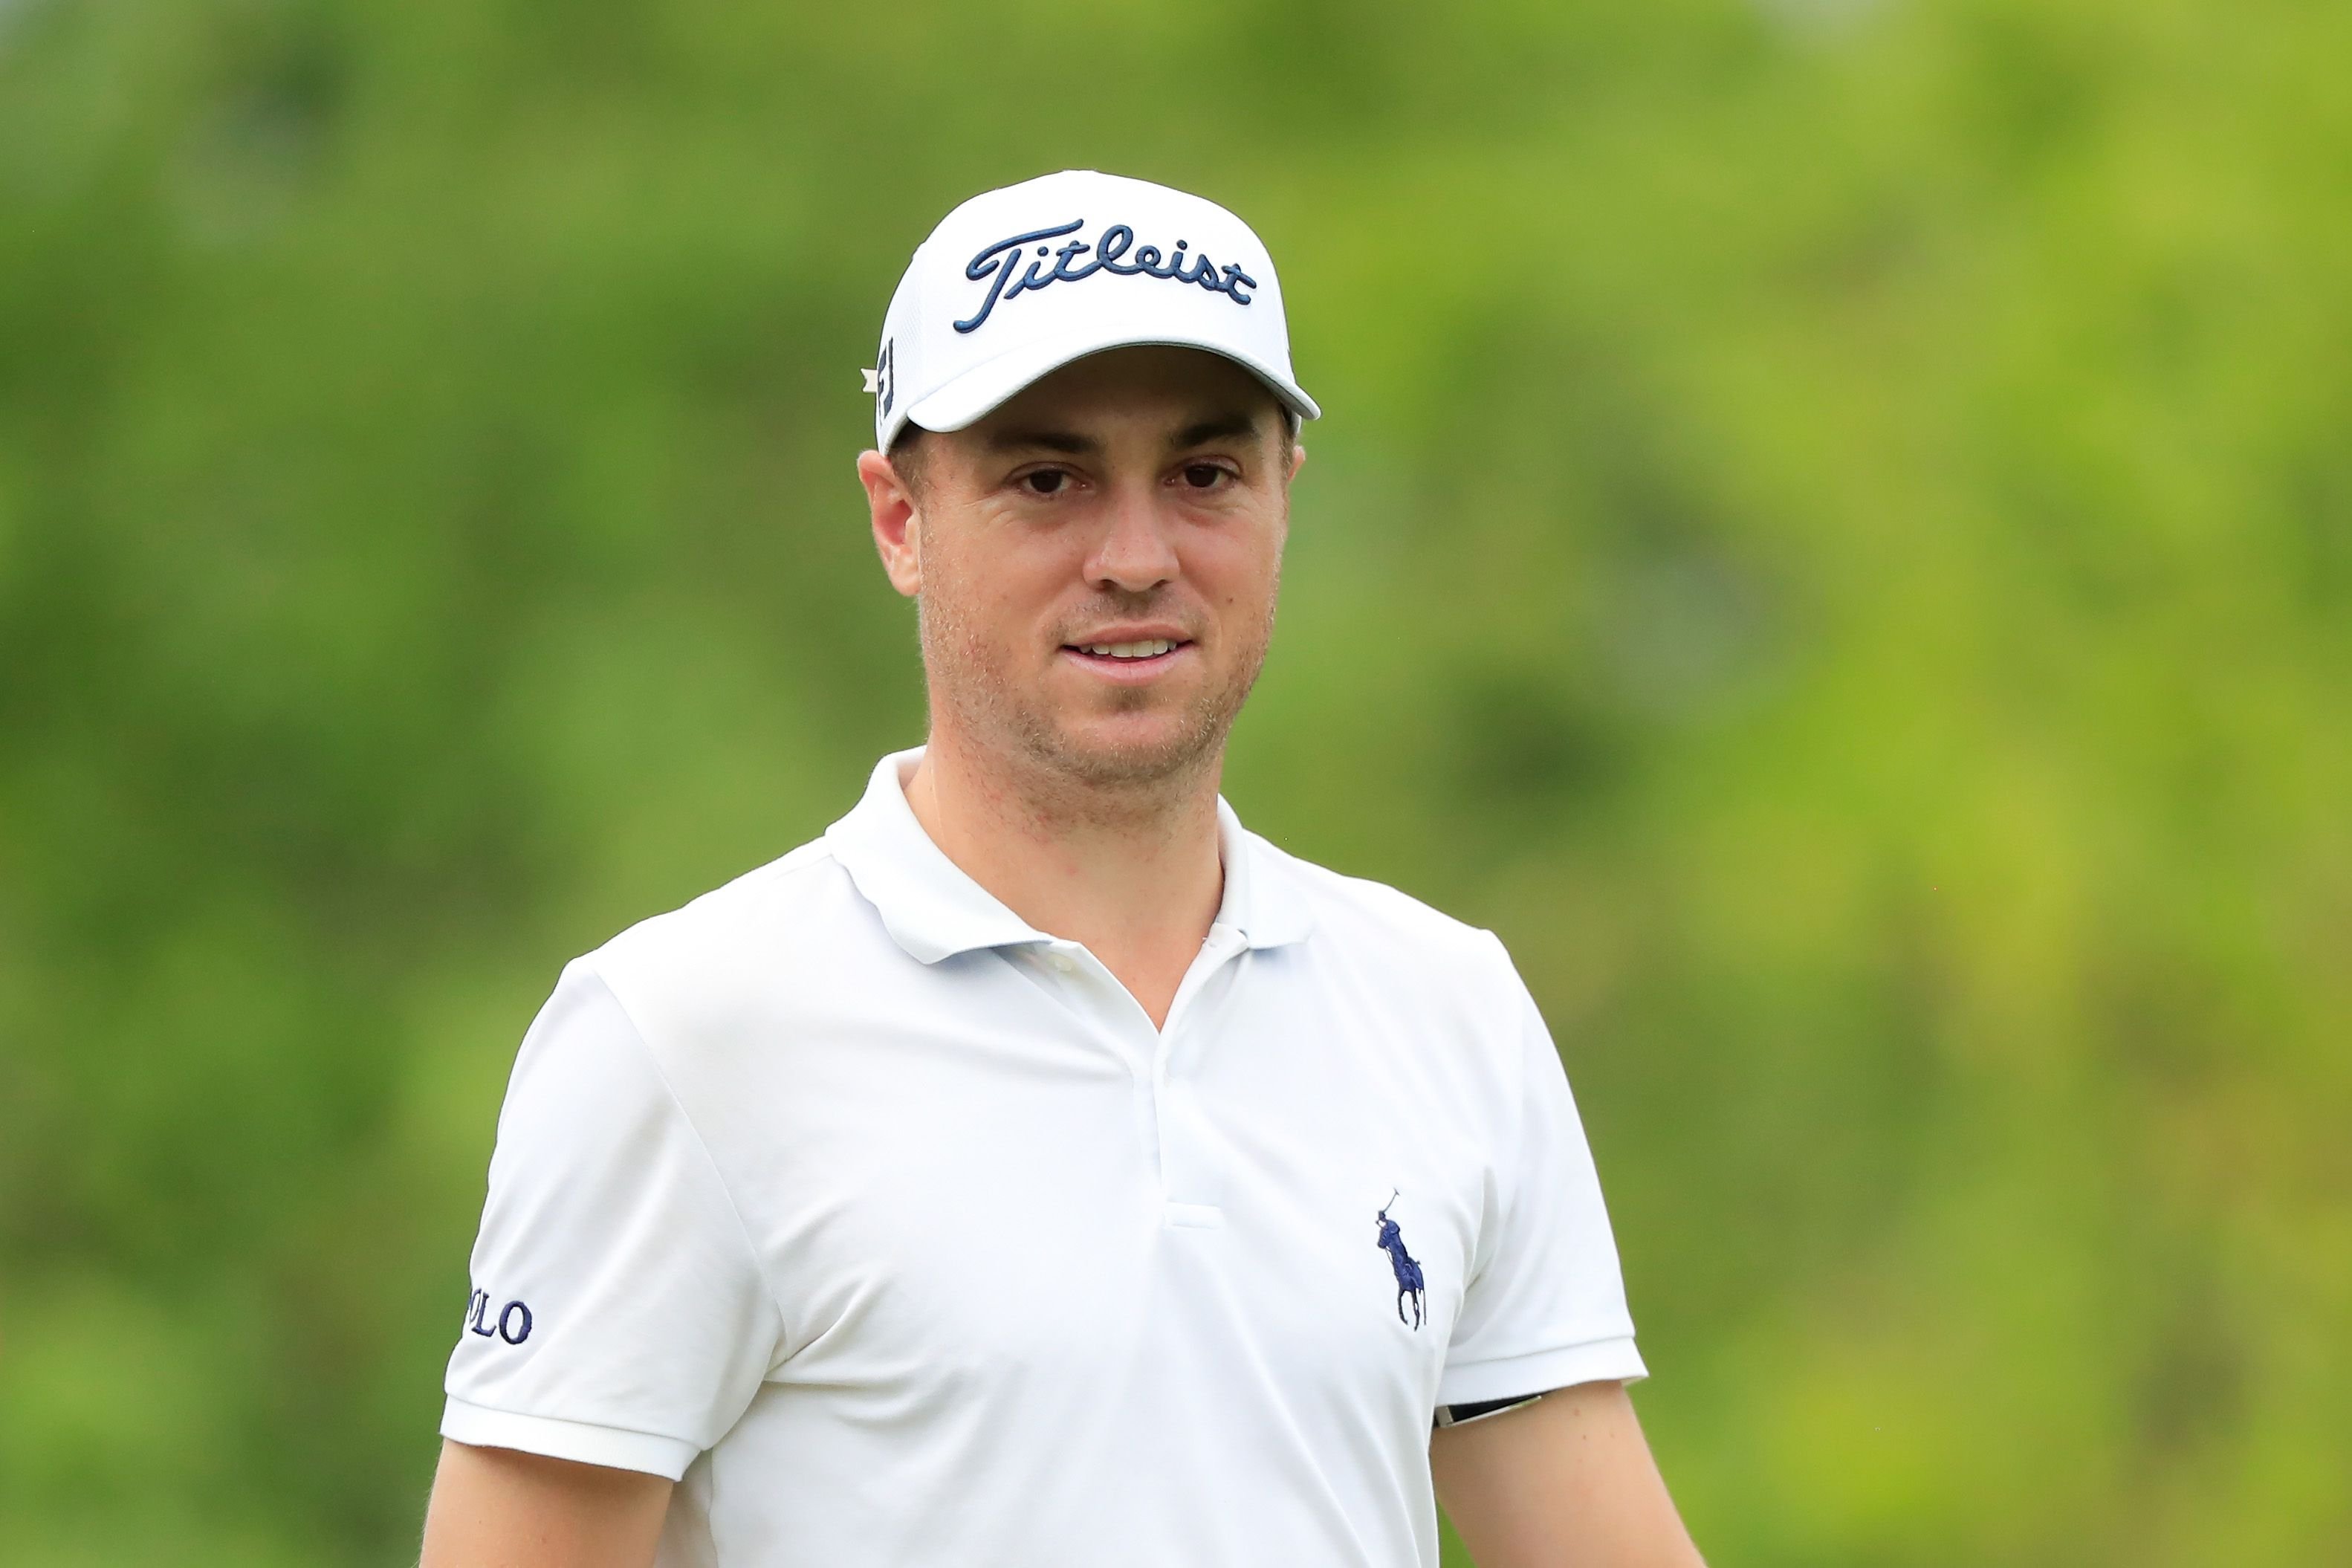 Justin Thomas during the final round of the Mayakoba Golf Classic at El Camaleón Golf Club in December 2020 in Playa del Carmen, Mexico | Source: Getty Images